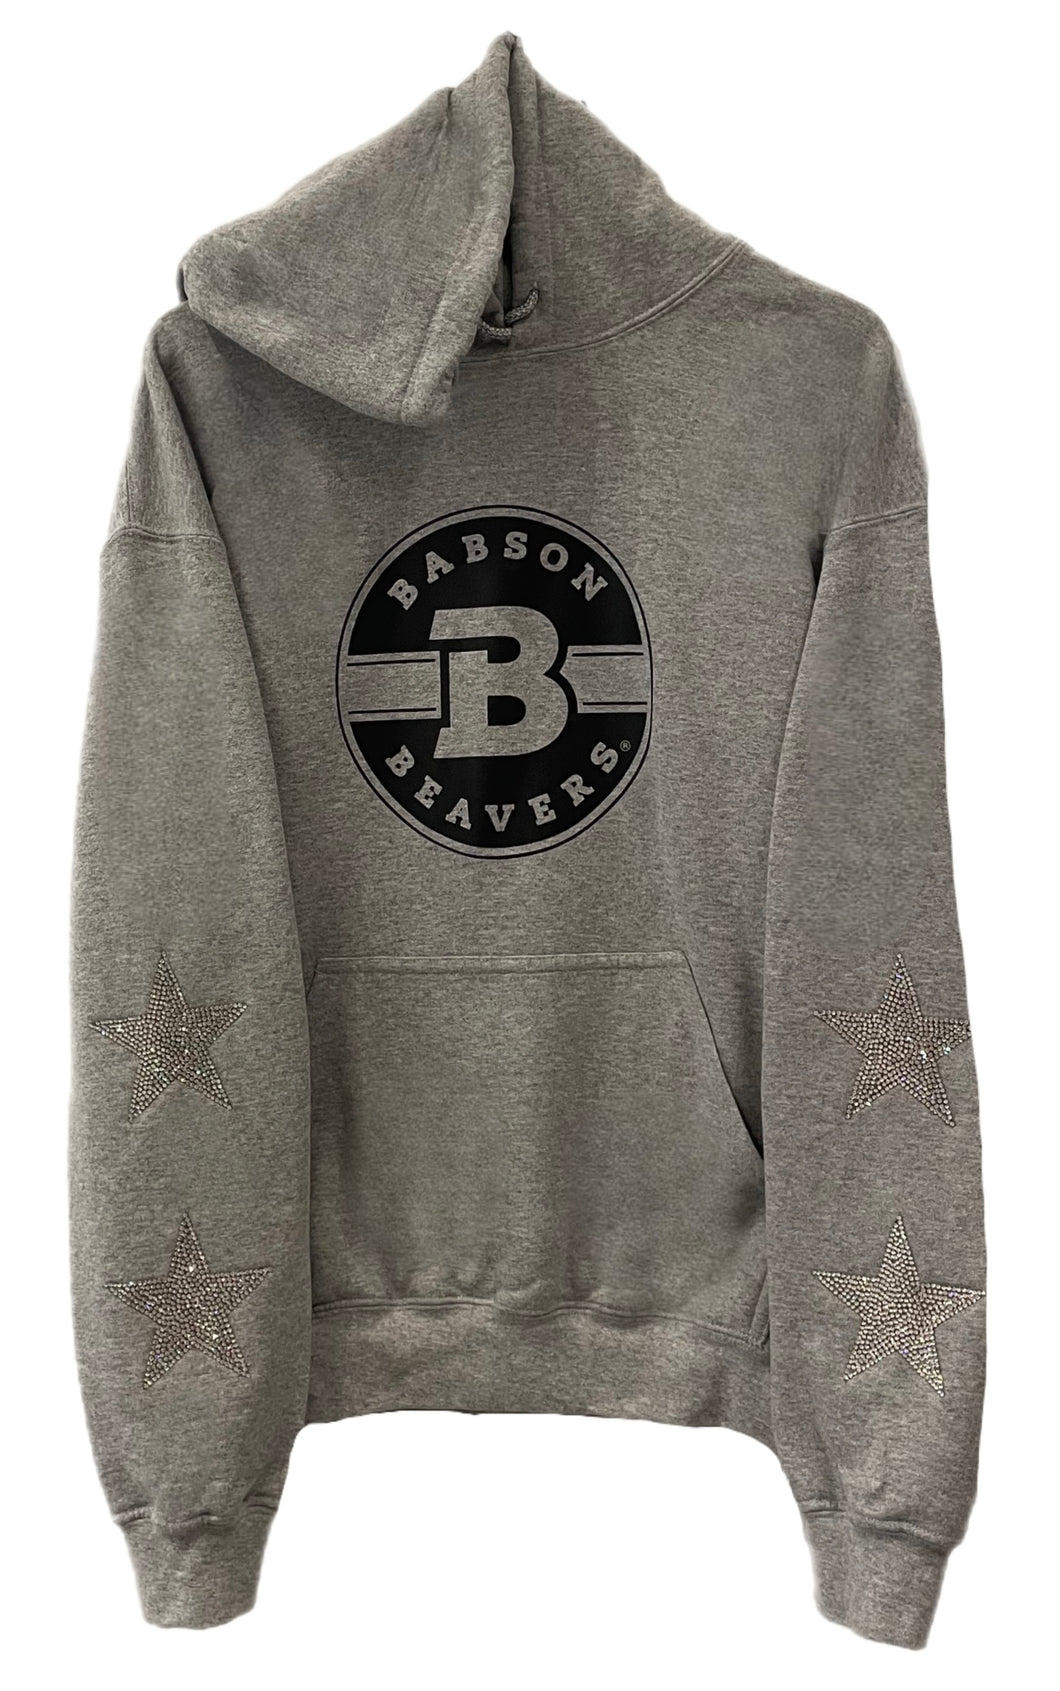 Babson College, One of a KIND Hoodie with Crystal Star Design.